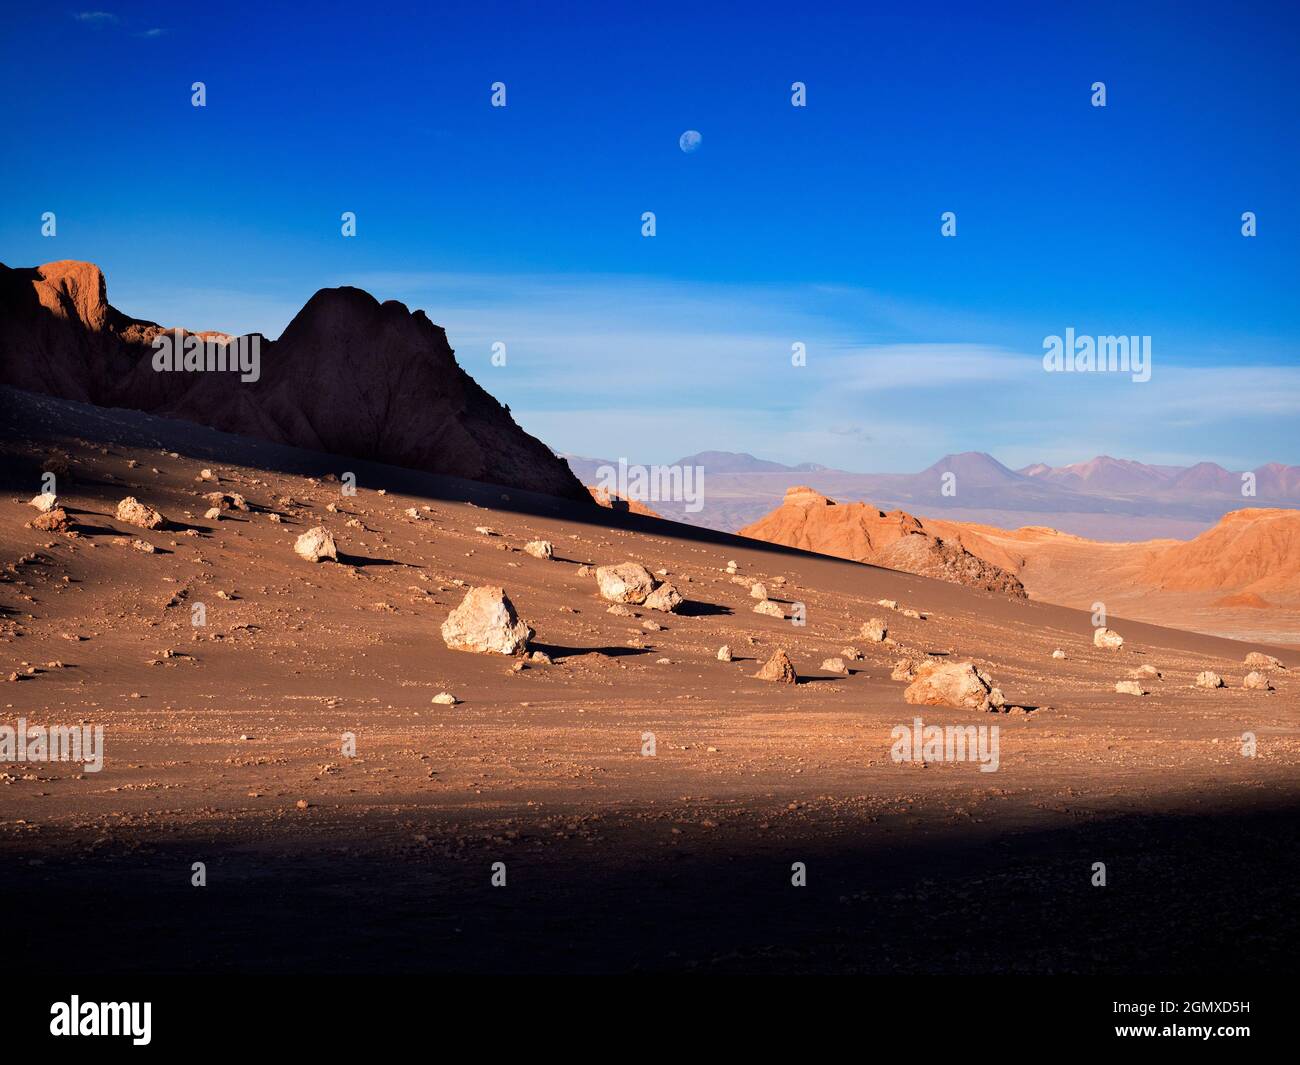 Valley of the Moon, Chile - 26 May 2018   The spectacular El Valle de la Luna (Valley of the Moon) is located in ChileÕs Atacama Desert, the driest pl Stock Photo